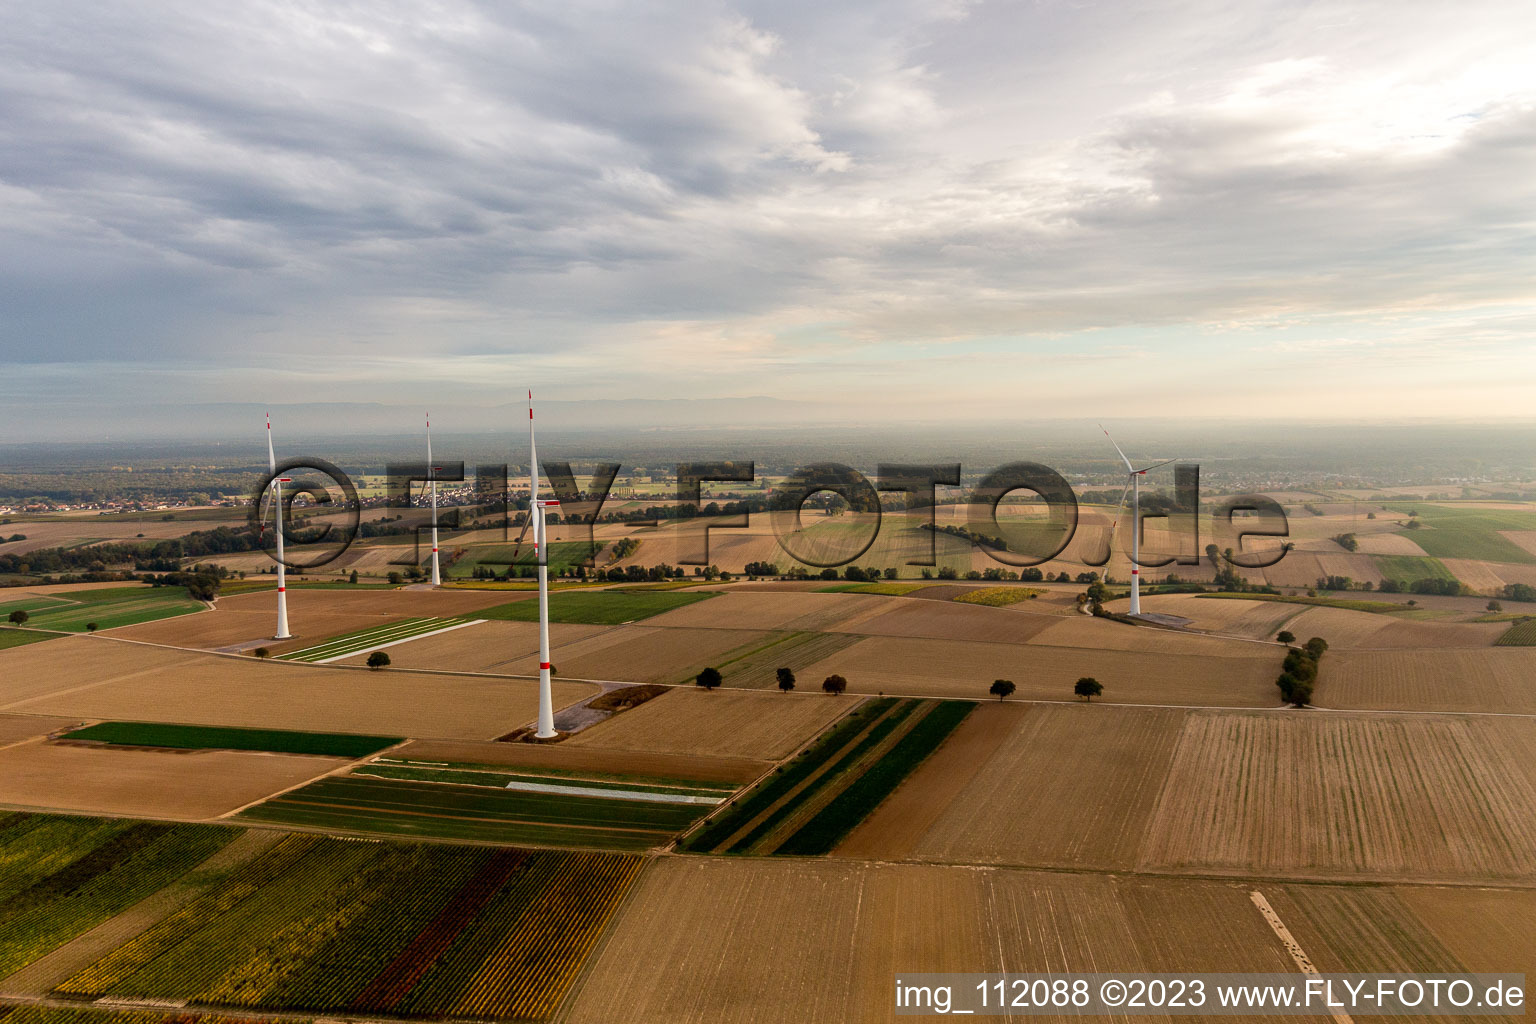 Aerial photograpy of EnBW wind farm - wind turbine with 6 wind turbines in Freckenfeld in the state Rhineland-Palatinate, Germany